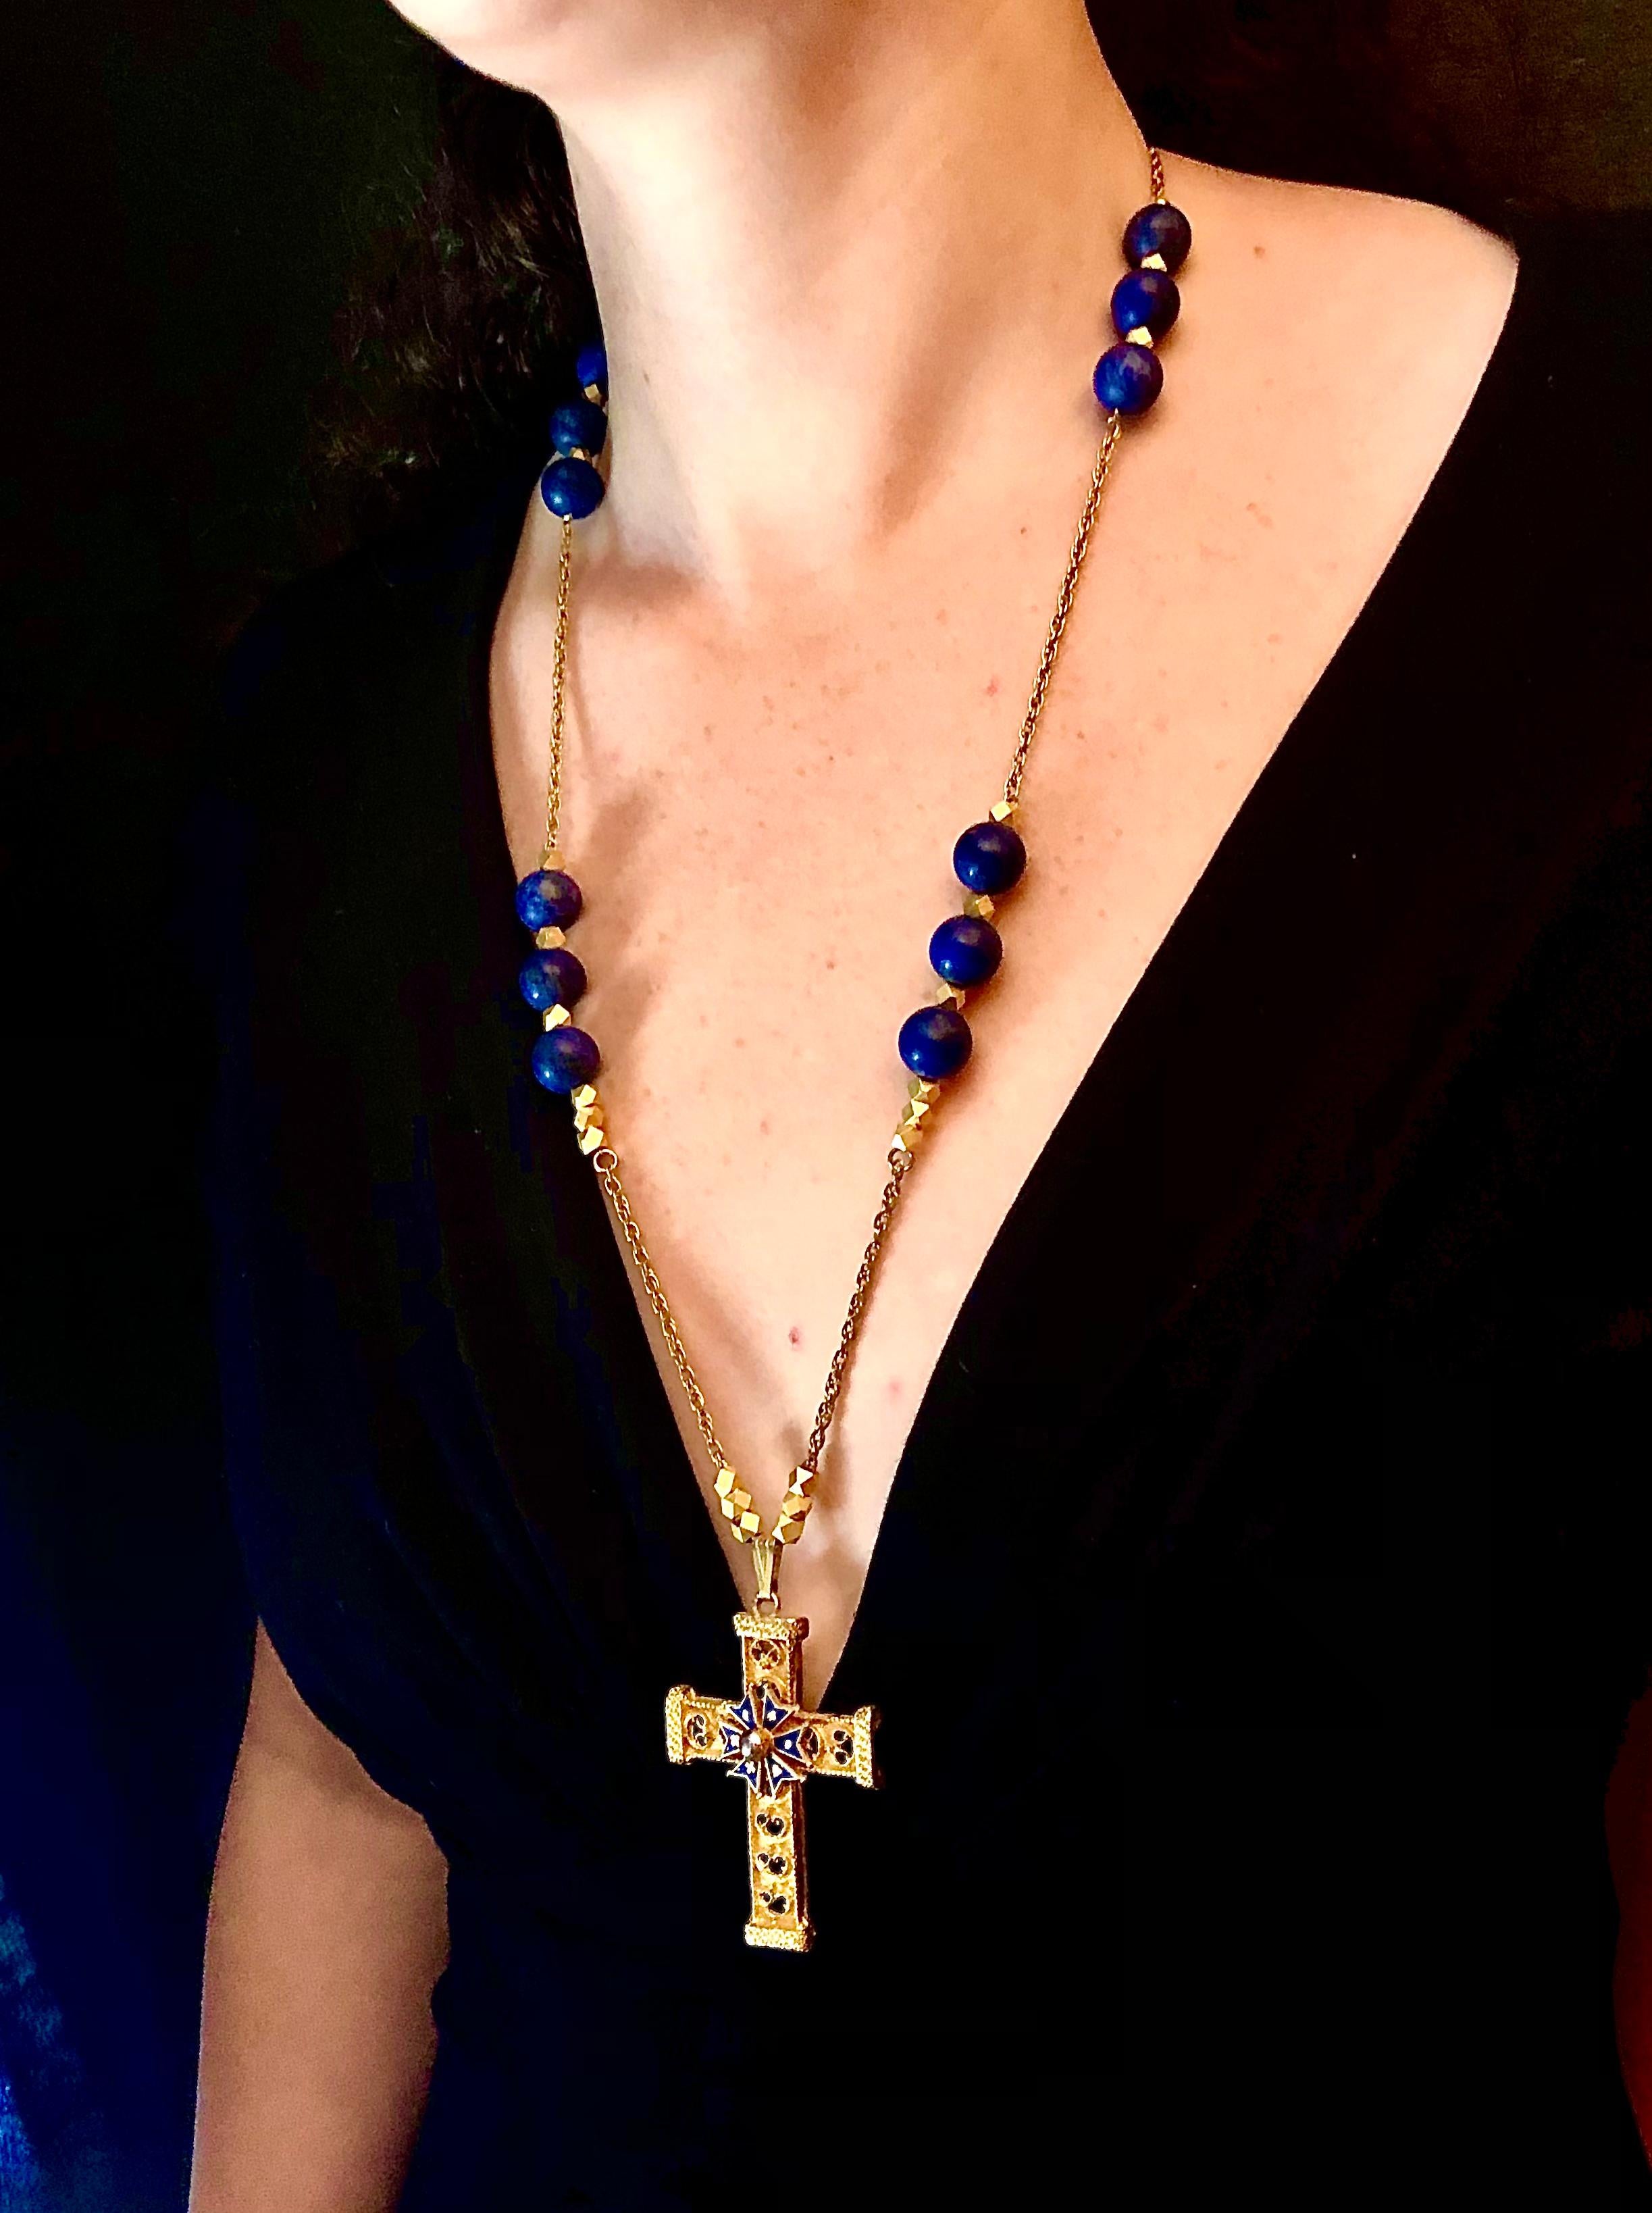 Vintage fashion jewel crucifix in medieval taste with enameled St. Andrew s cross in center.

The vintage cross has been suspended from a new chain in an adaptation of a rosary form with matte lapis lazuli beads and angular form gilt metal spacer